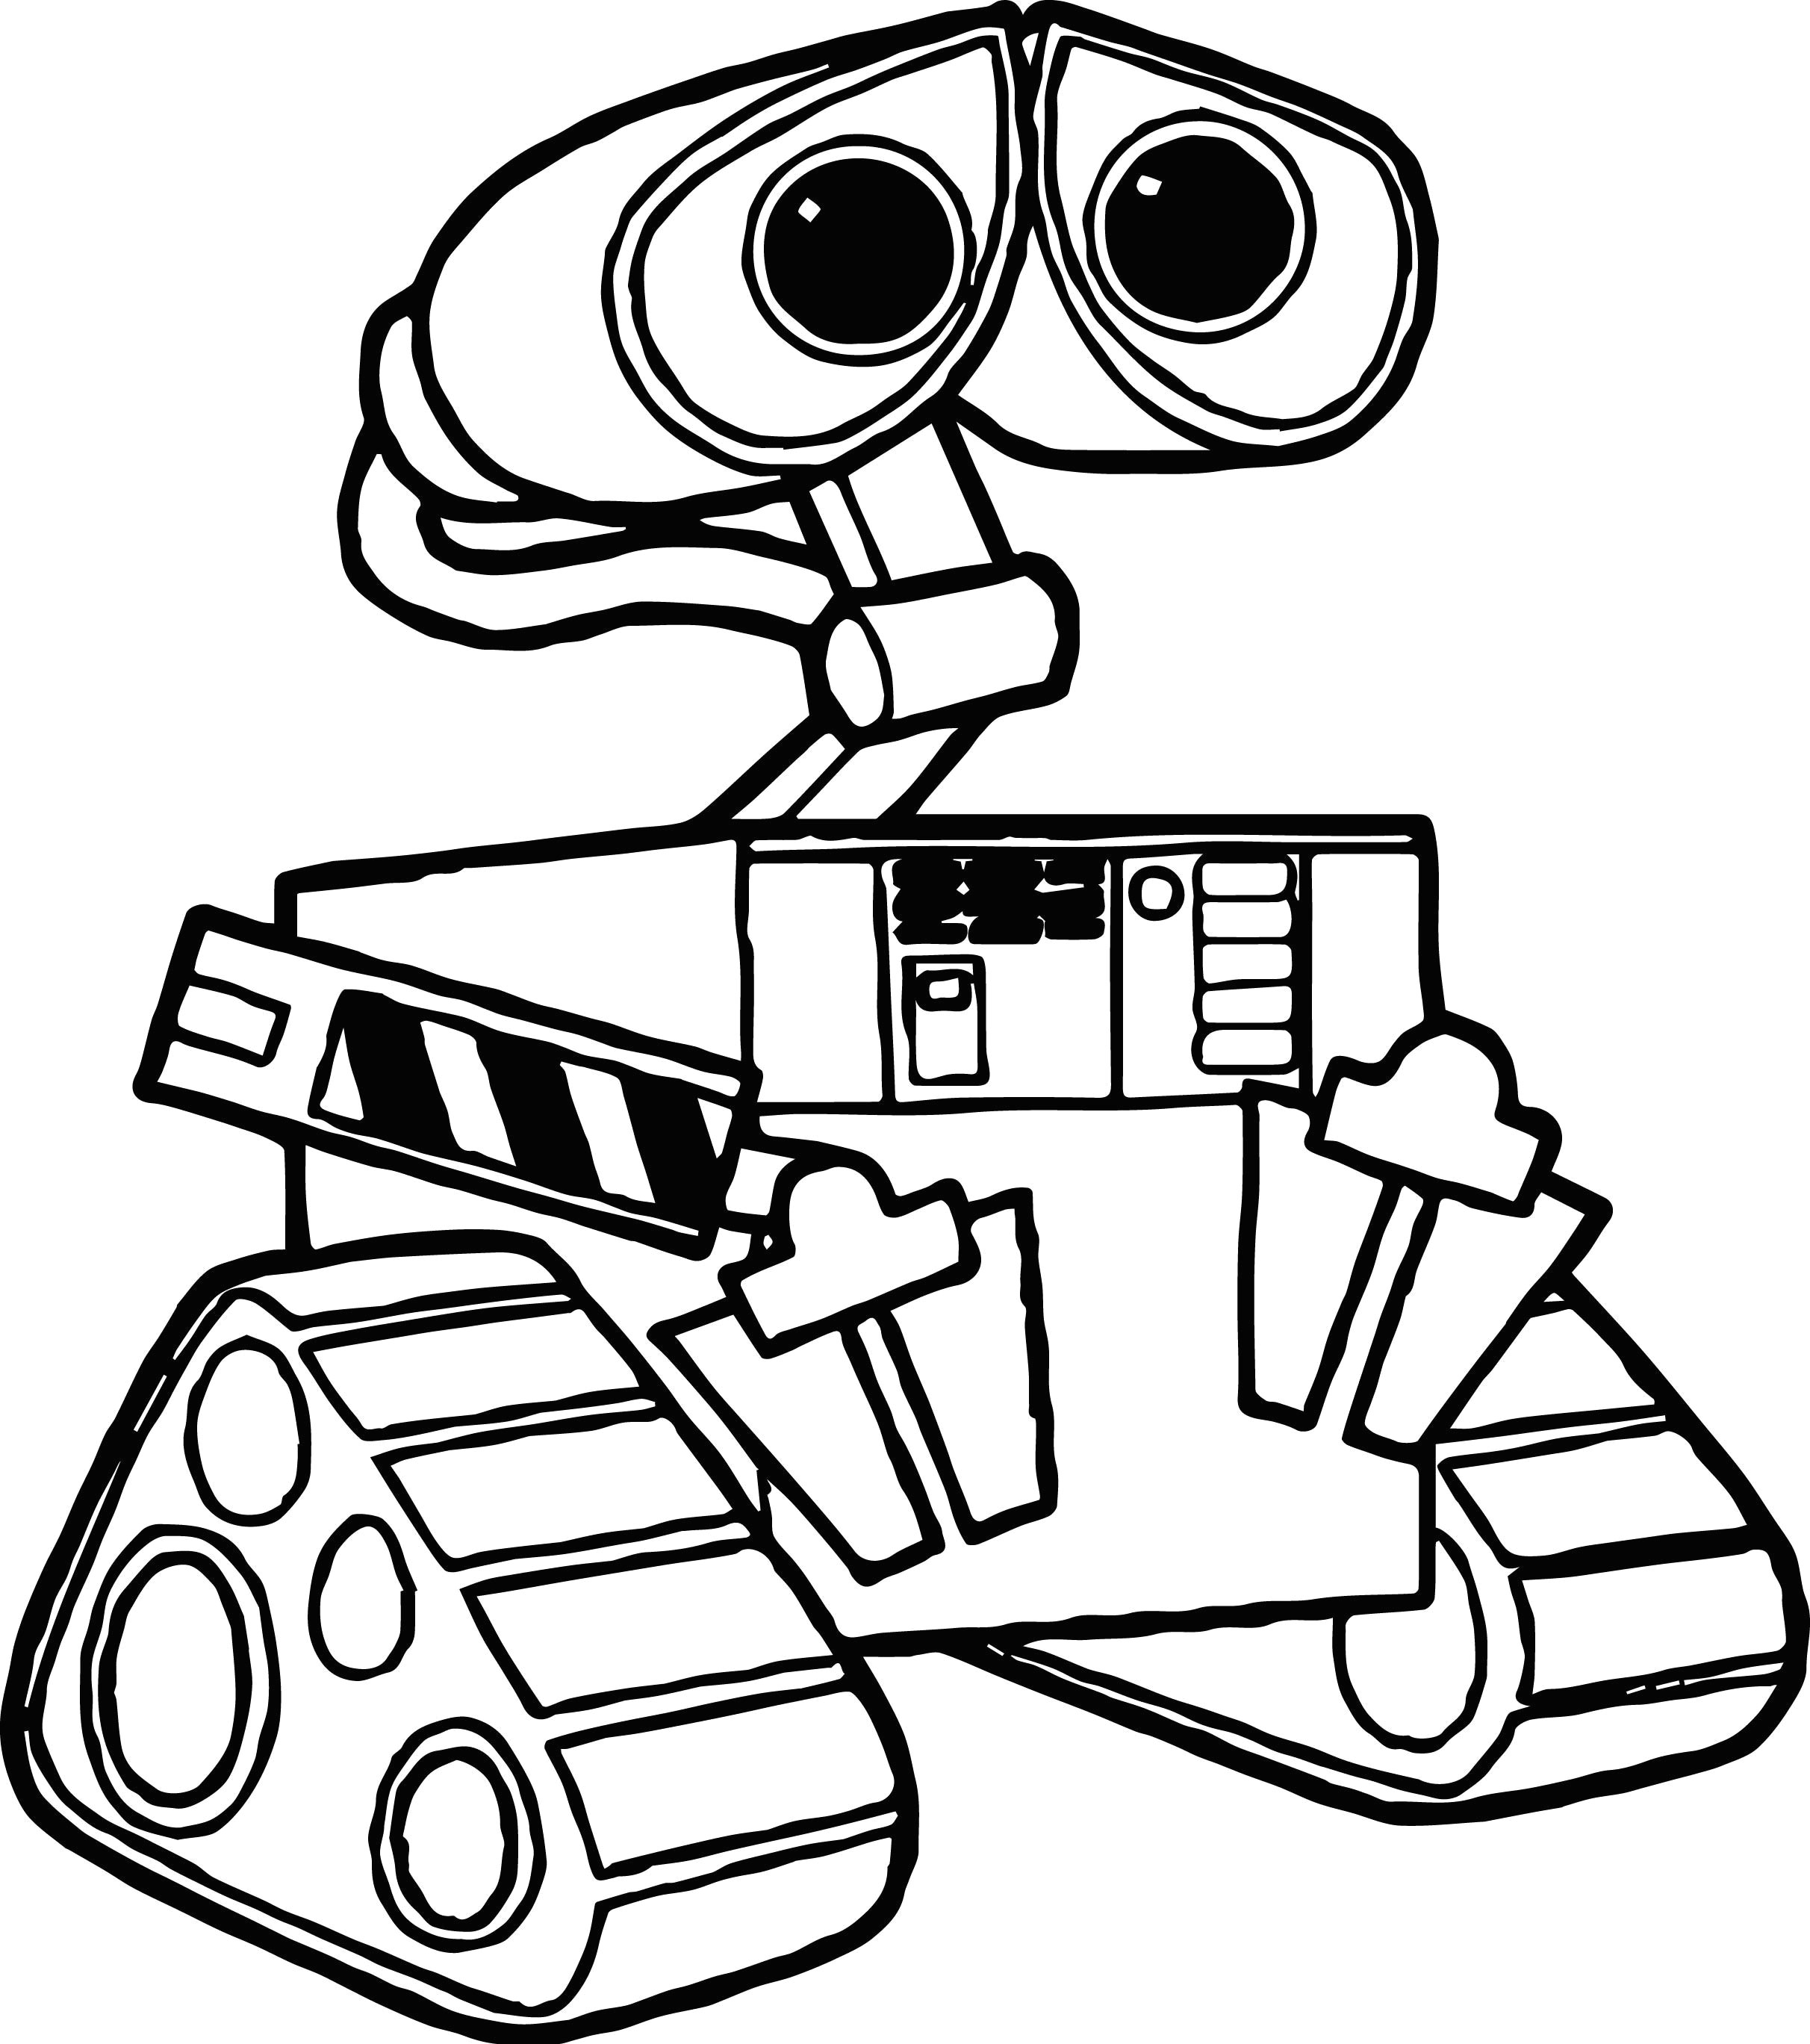 eazy e coloring pages awesome wall e coloring pages 20 t wall e home coloring pages